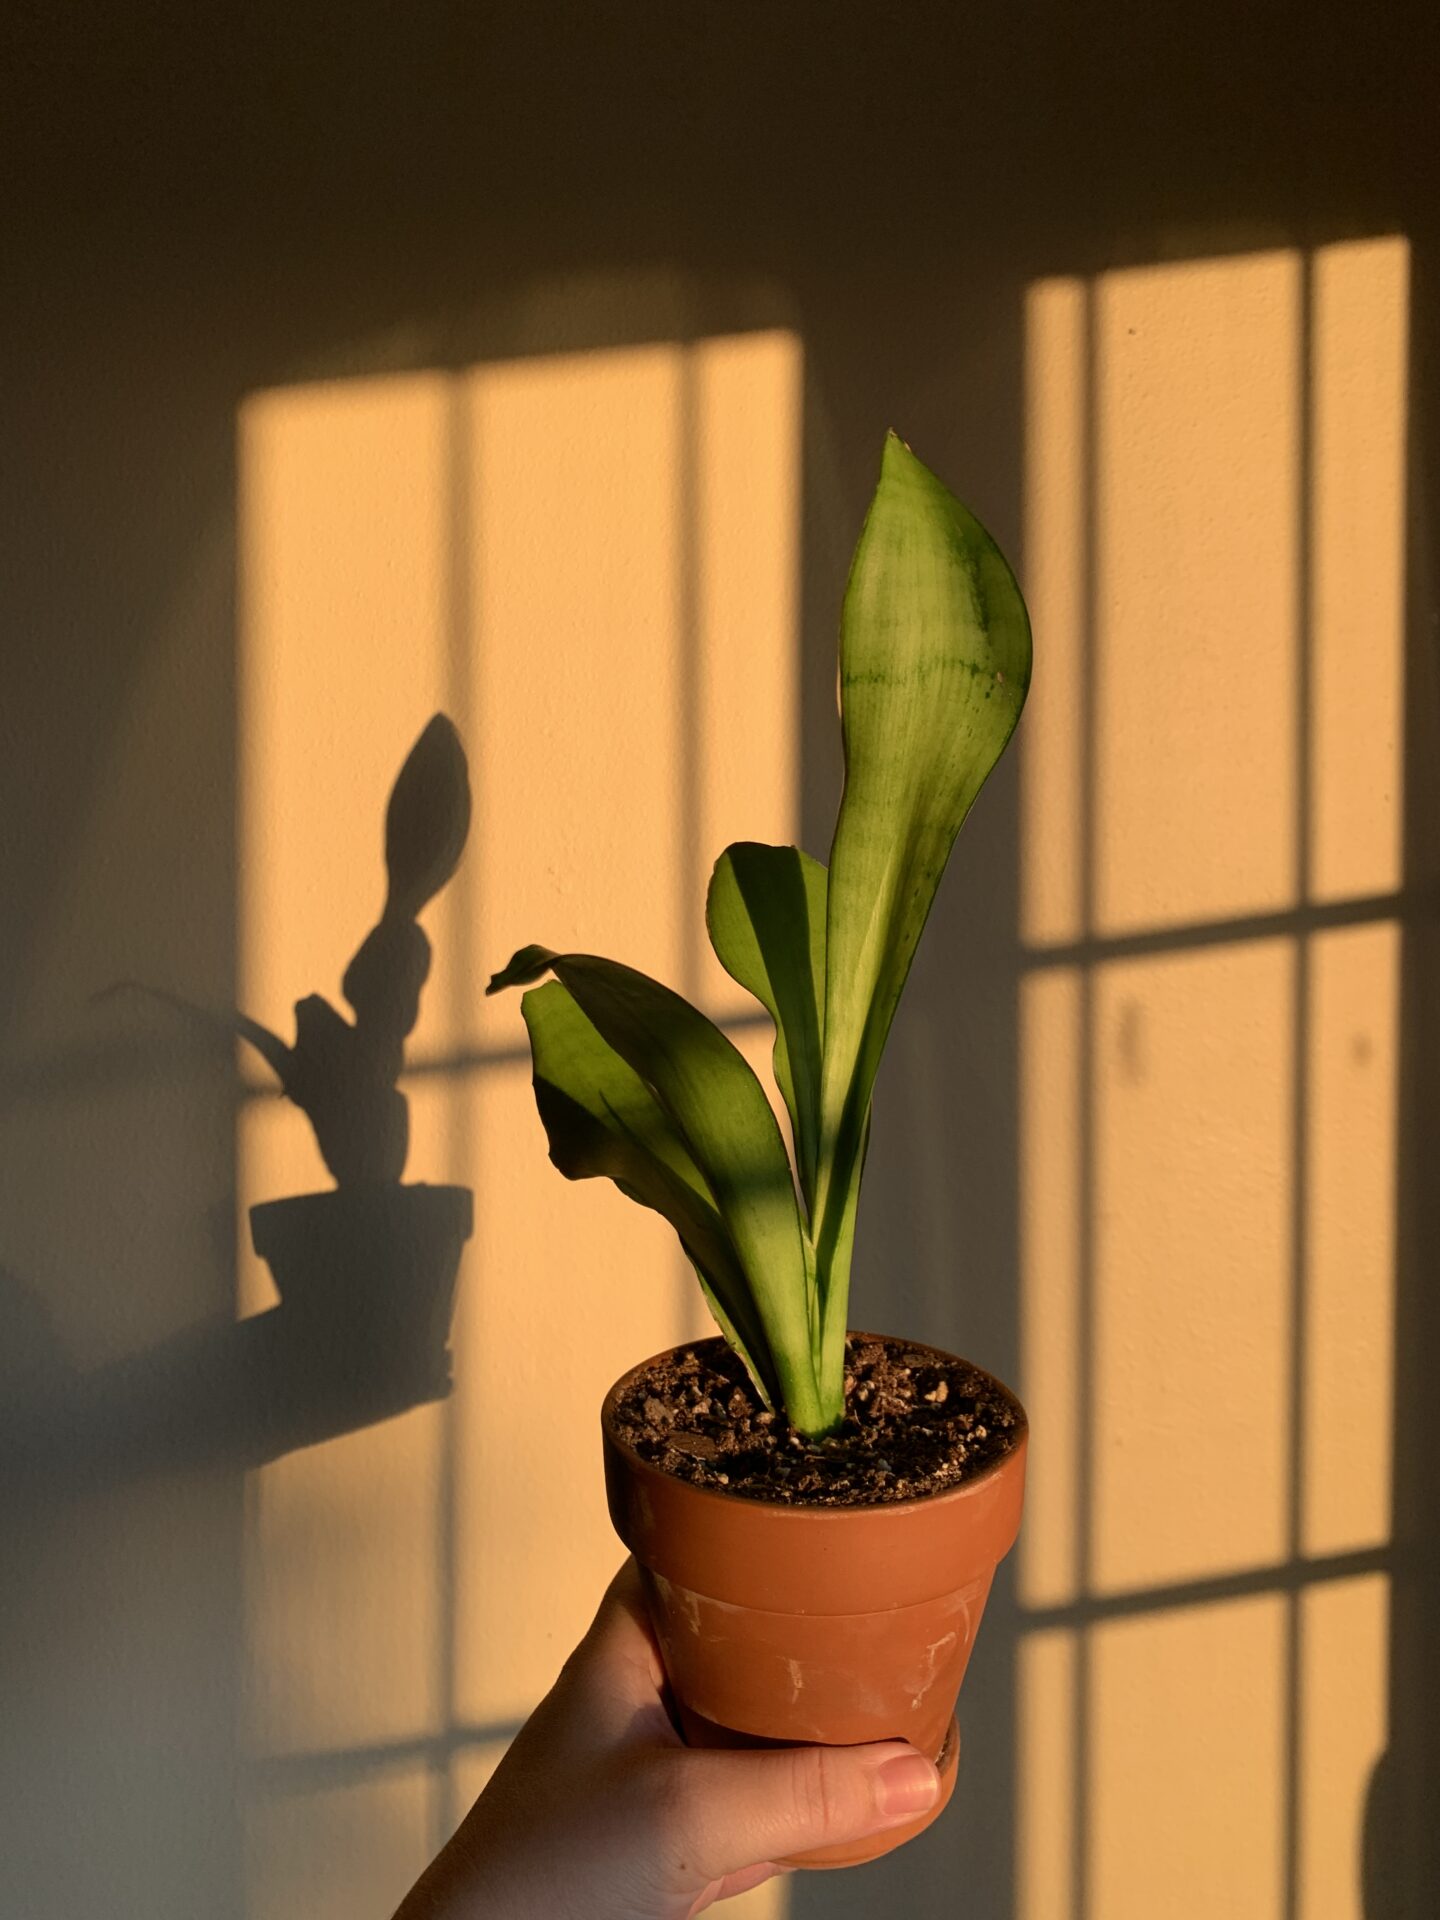 HOW TO CARE FOR THE SANSEVIERIA